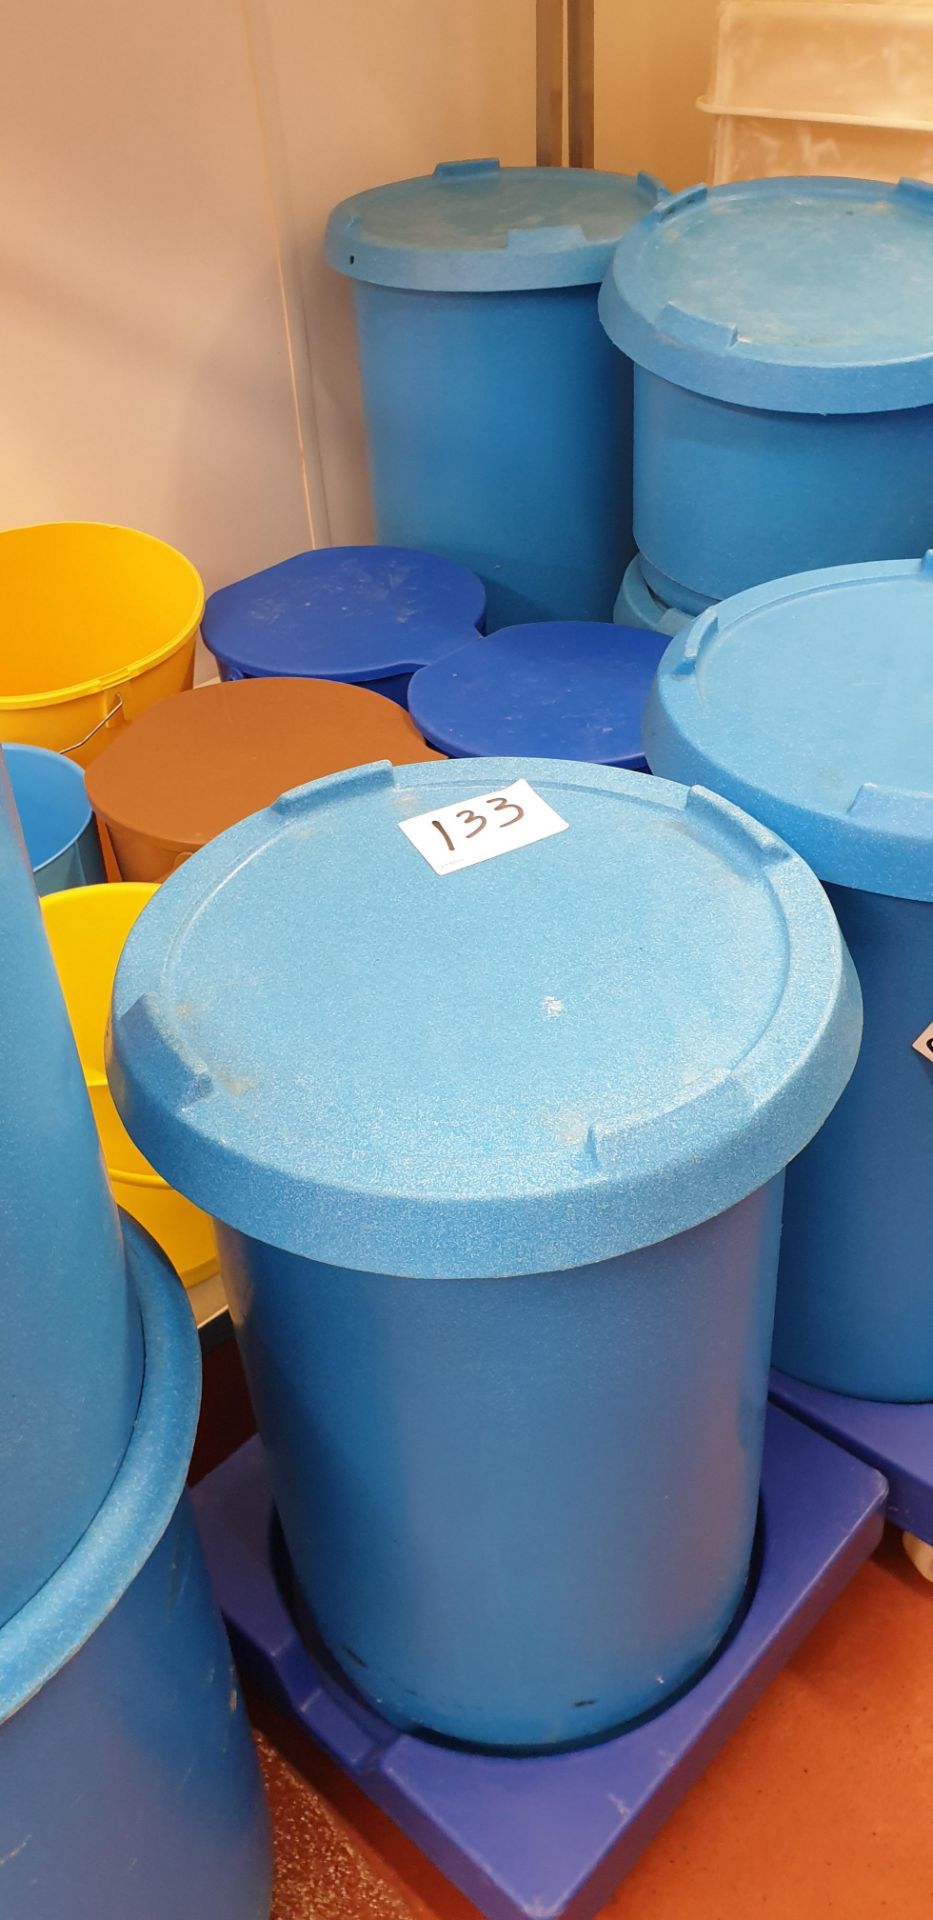 15 x Variety of Colours Circular Plastic Bins - Image 2 of 3